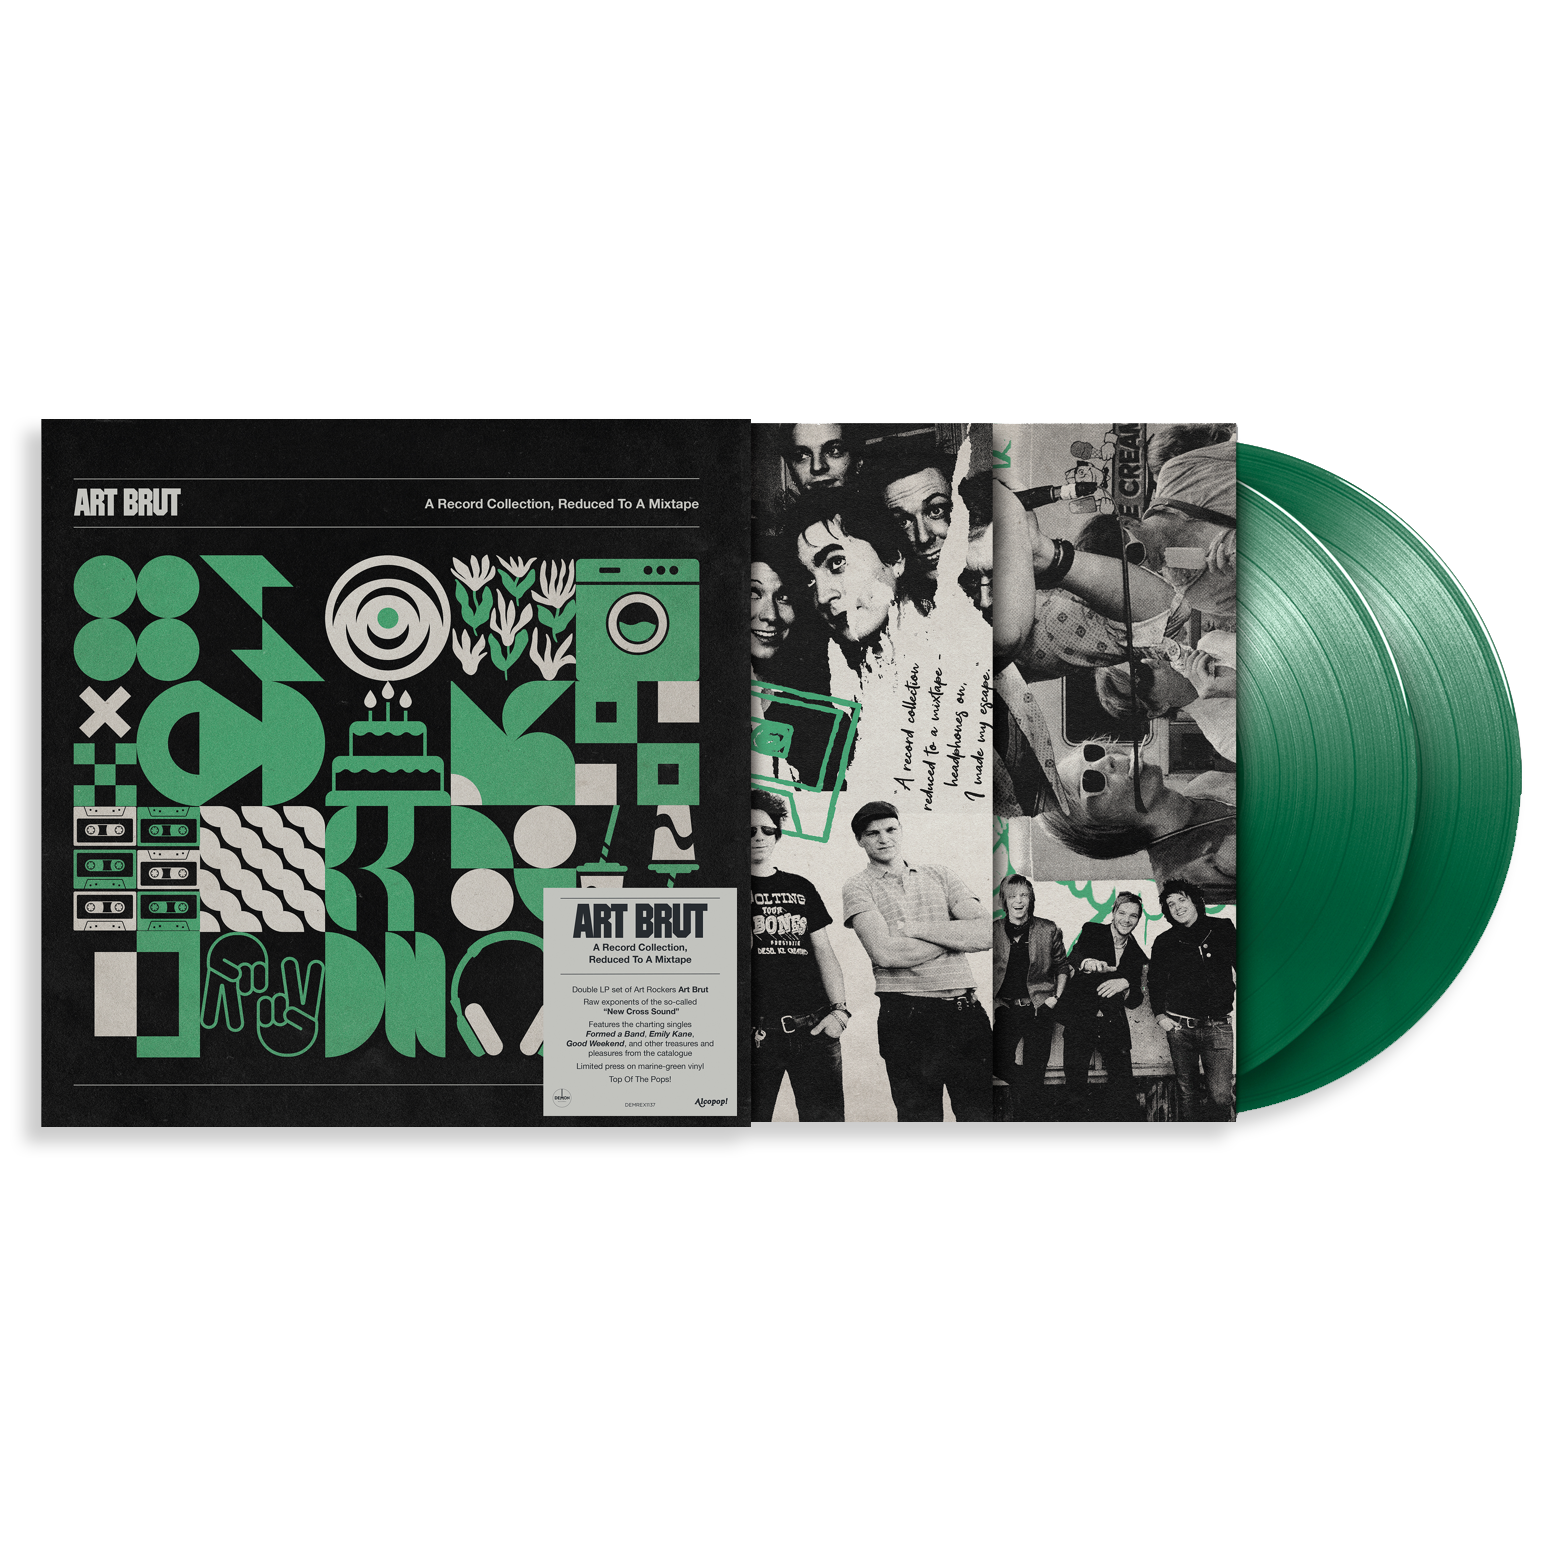 Art Brut - A Record Collection, Reduced To A Mixtape: Limited Green Vinyl 2LP